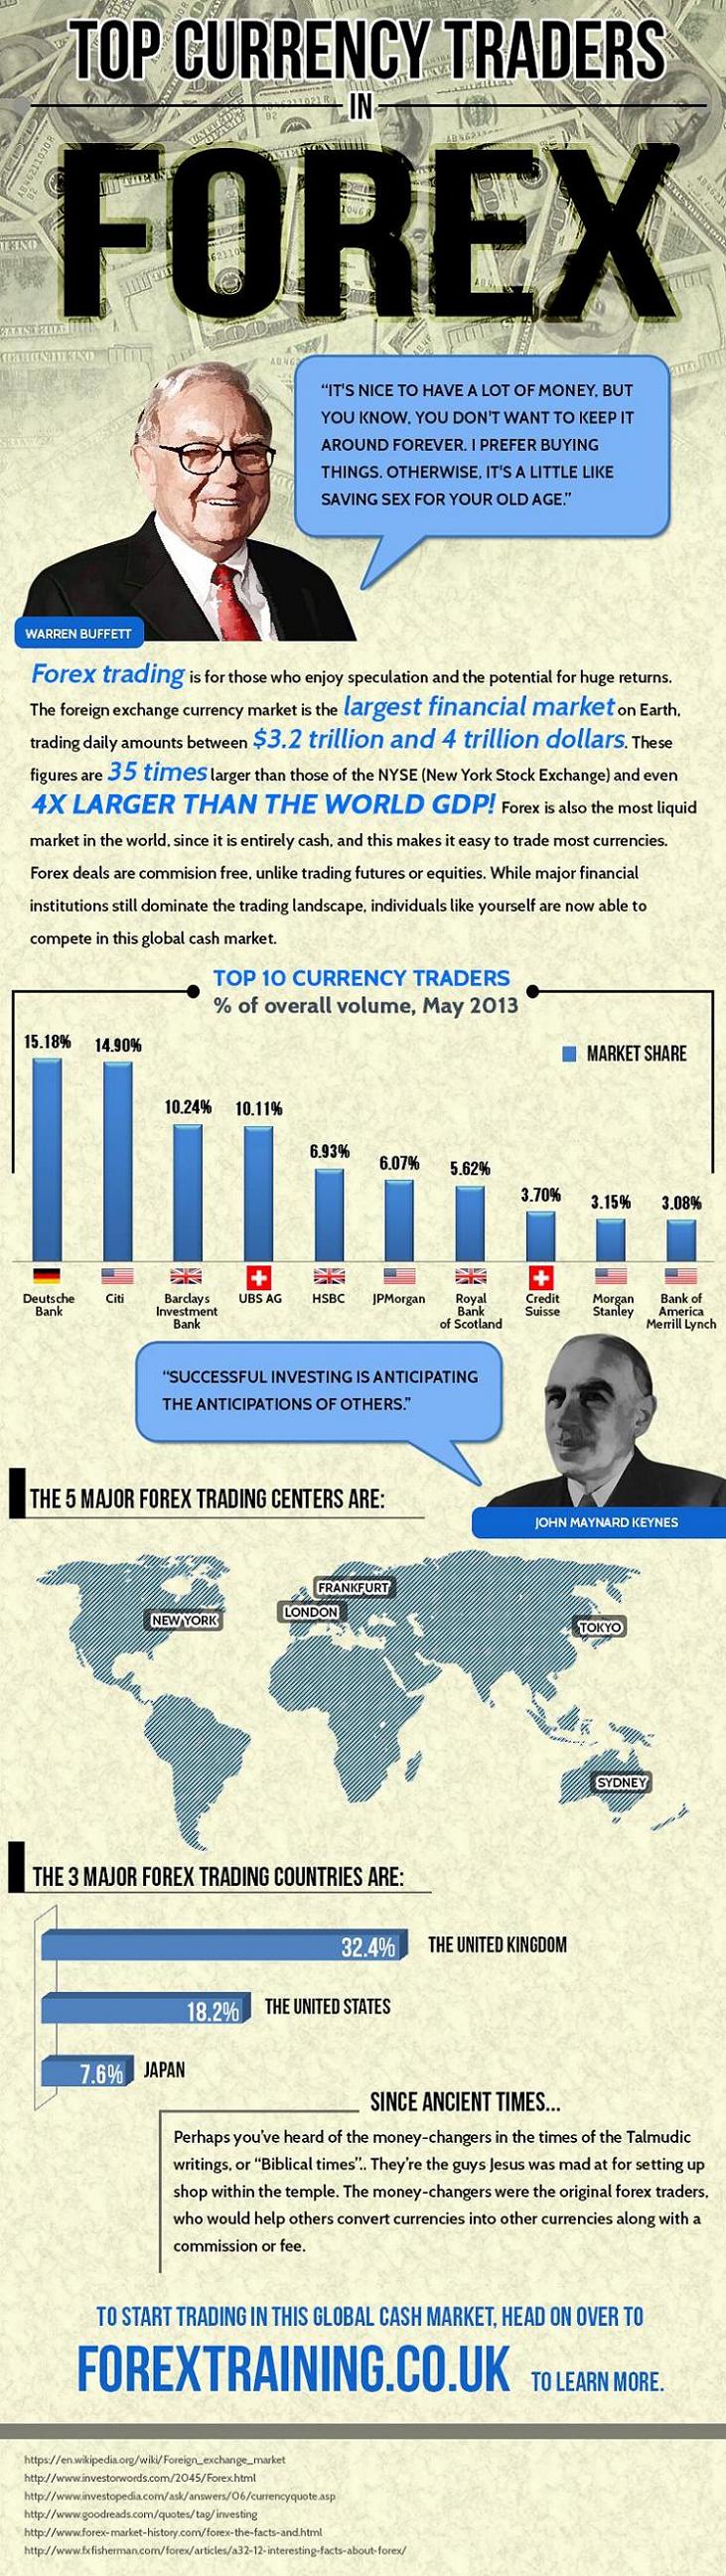 Top forex traders in the world